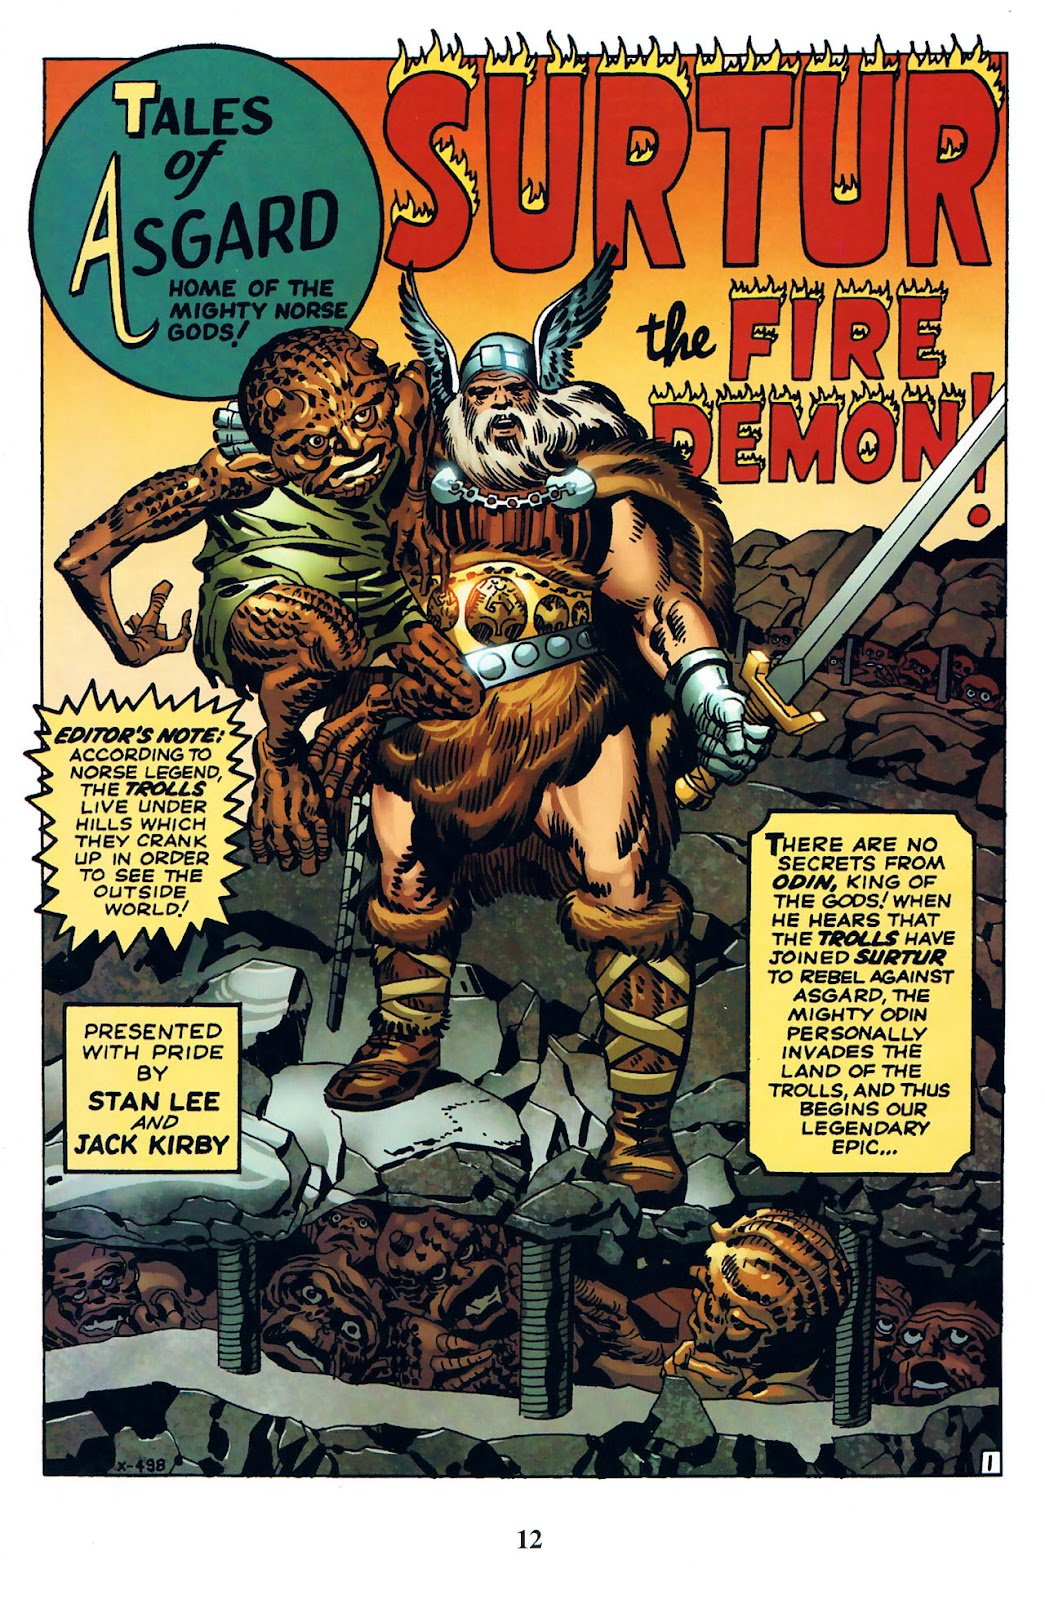 Thor: Tales of Asgard by Stan Lee & Jack Kirby issue 1 - Page 14